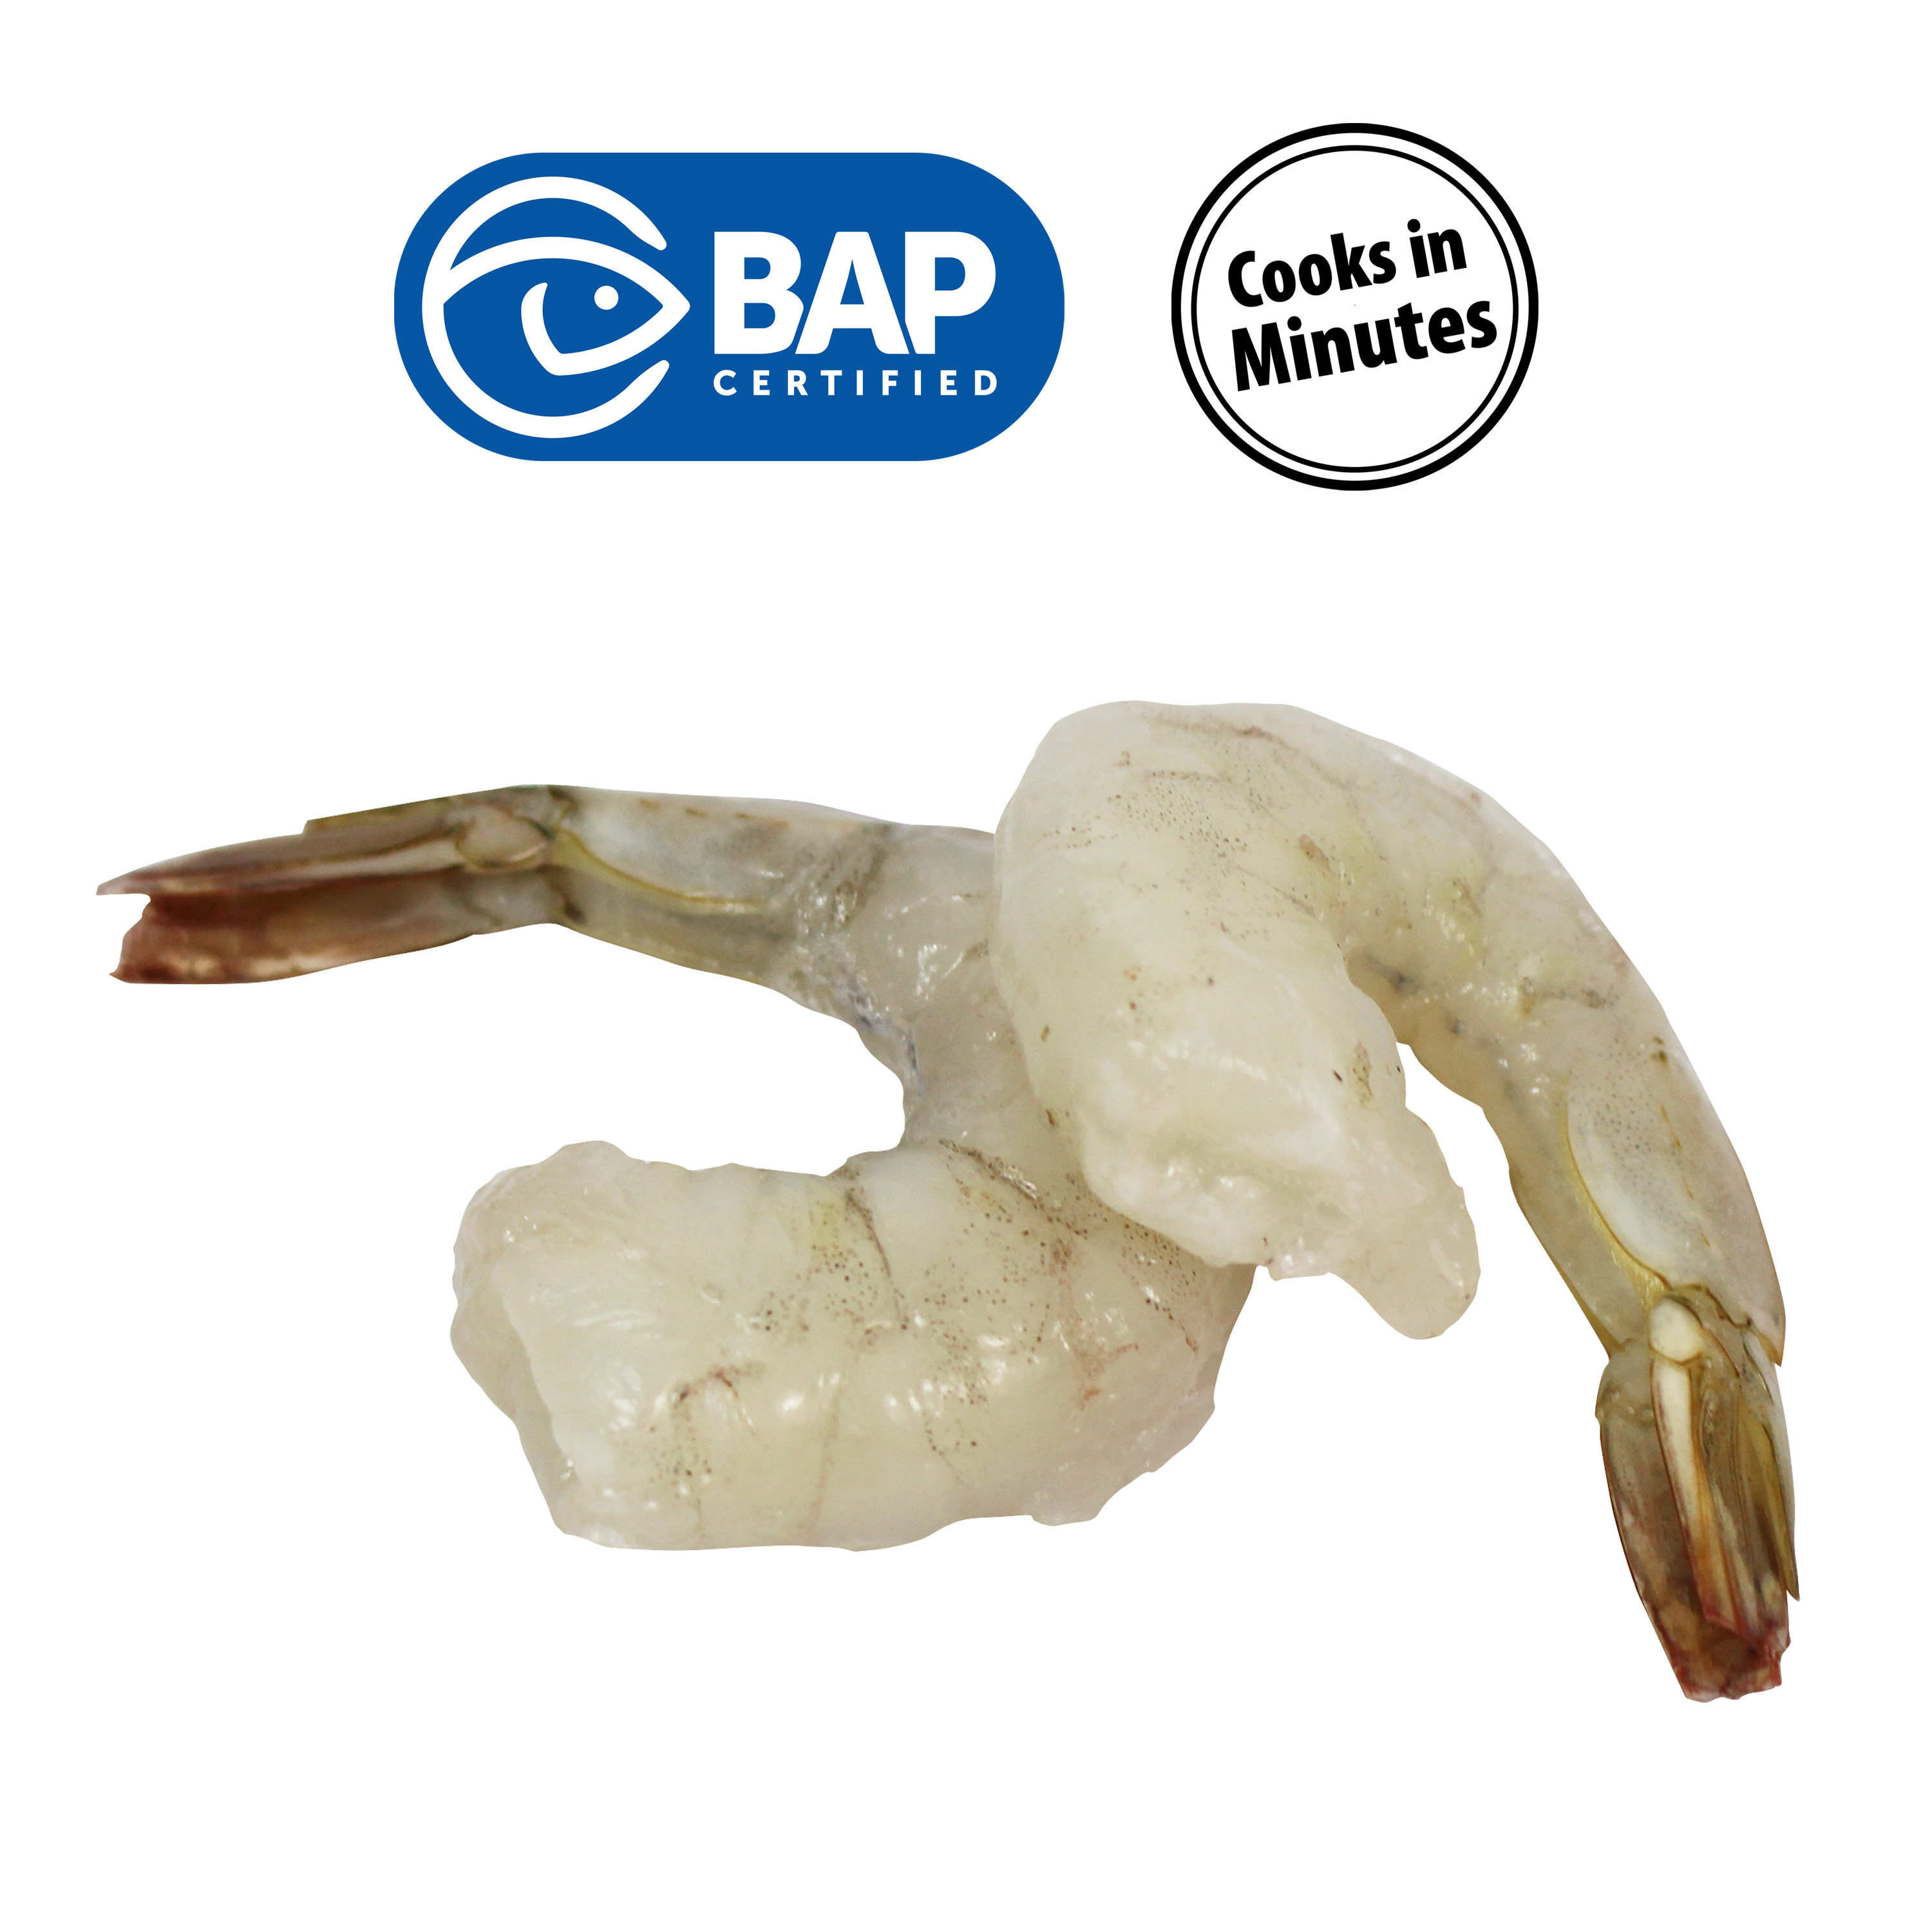 Great Value Frozen Peeled Tail on Extra Large Shrimp, 12 oz (26-30 Count per lb) - image 2 of 5